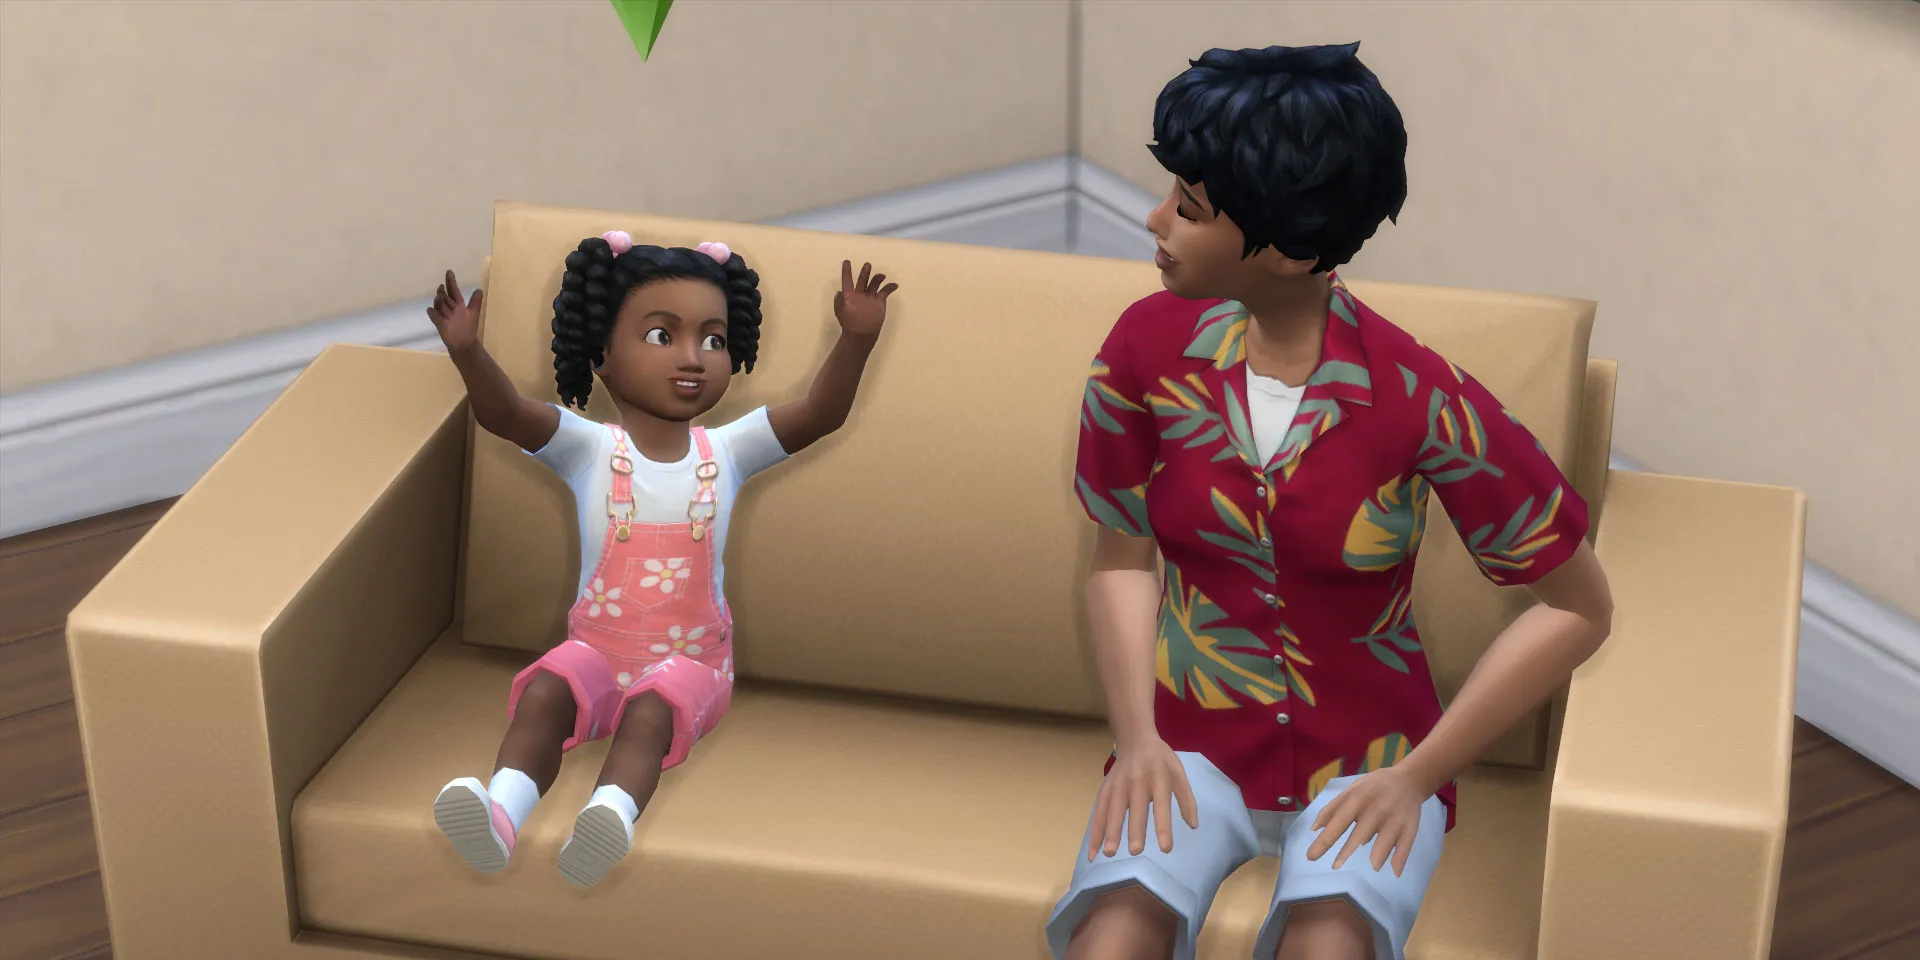 A Toddler Sim talking to her mom while both sit on the couch in The Sims 4.